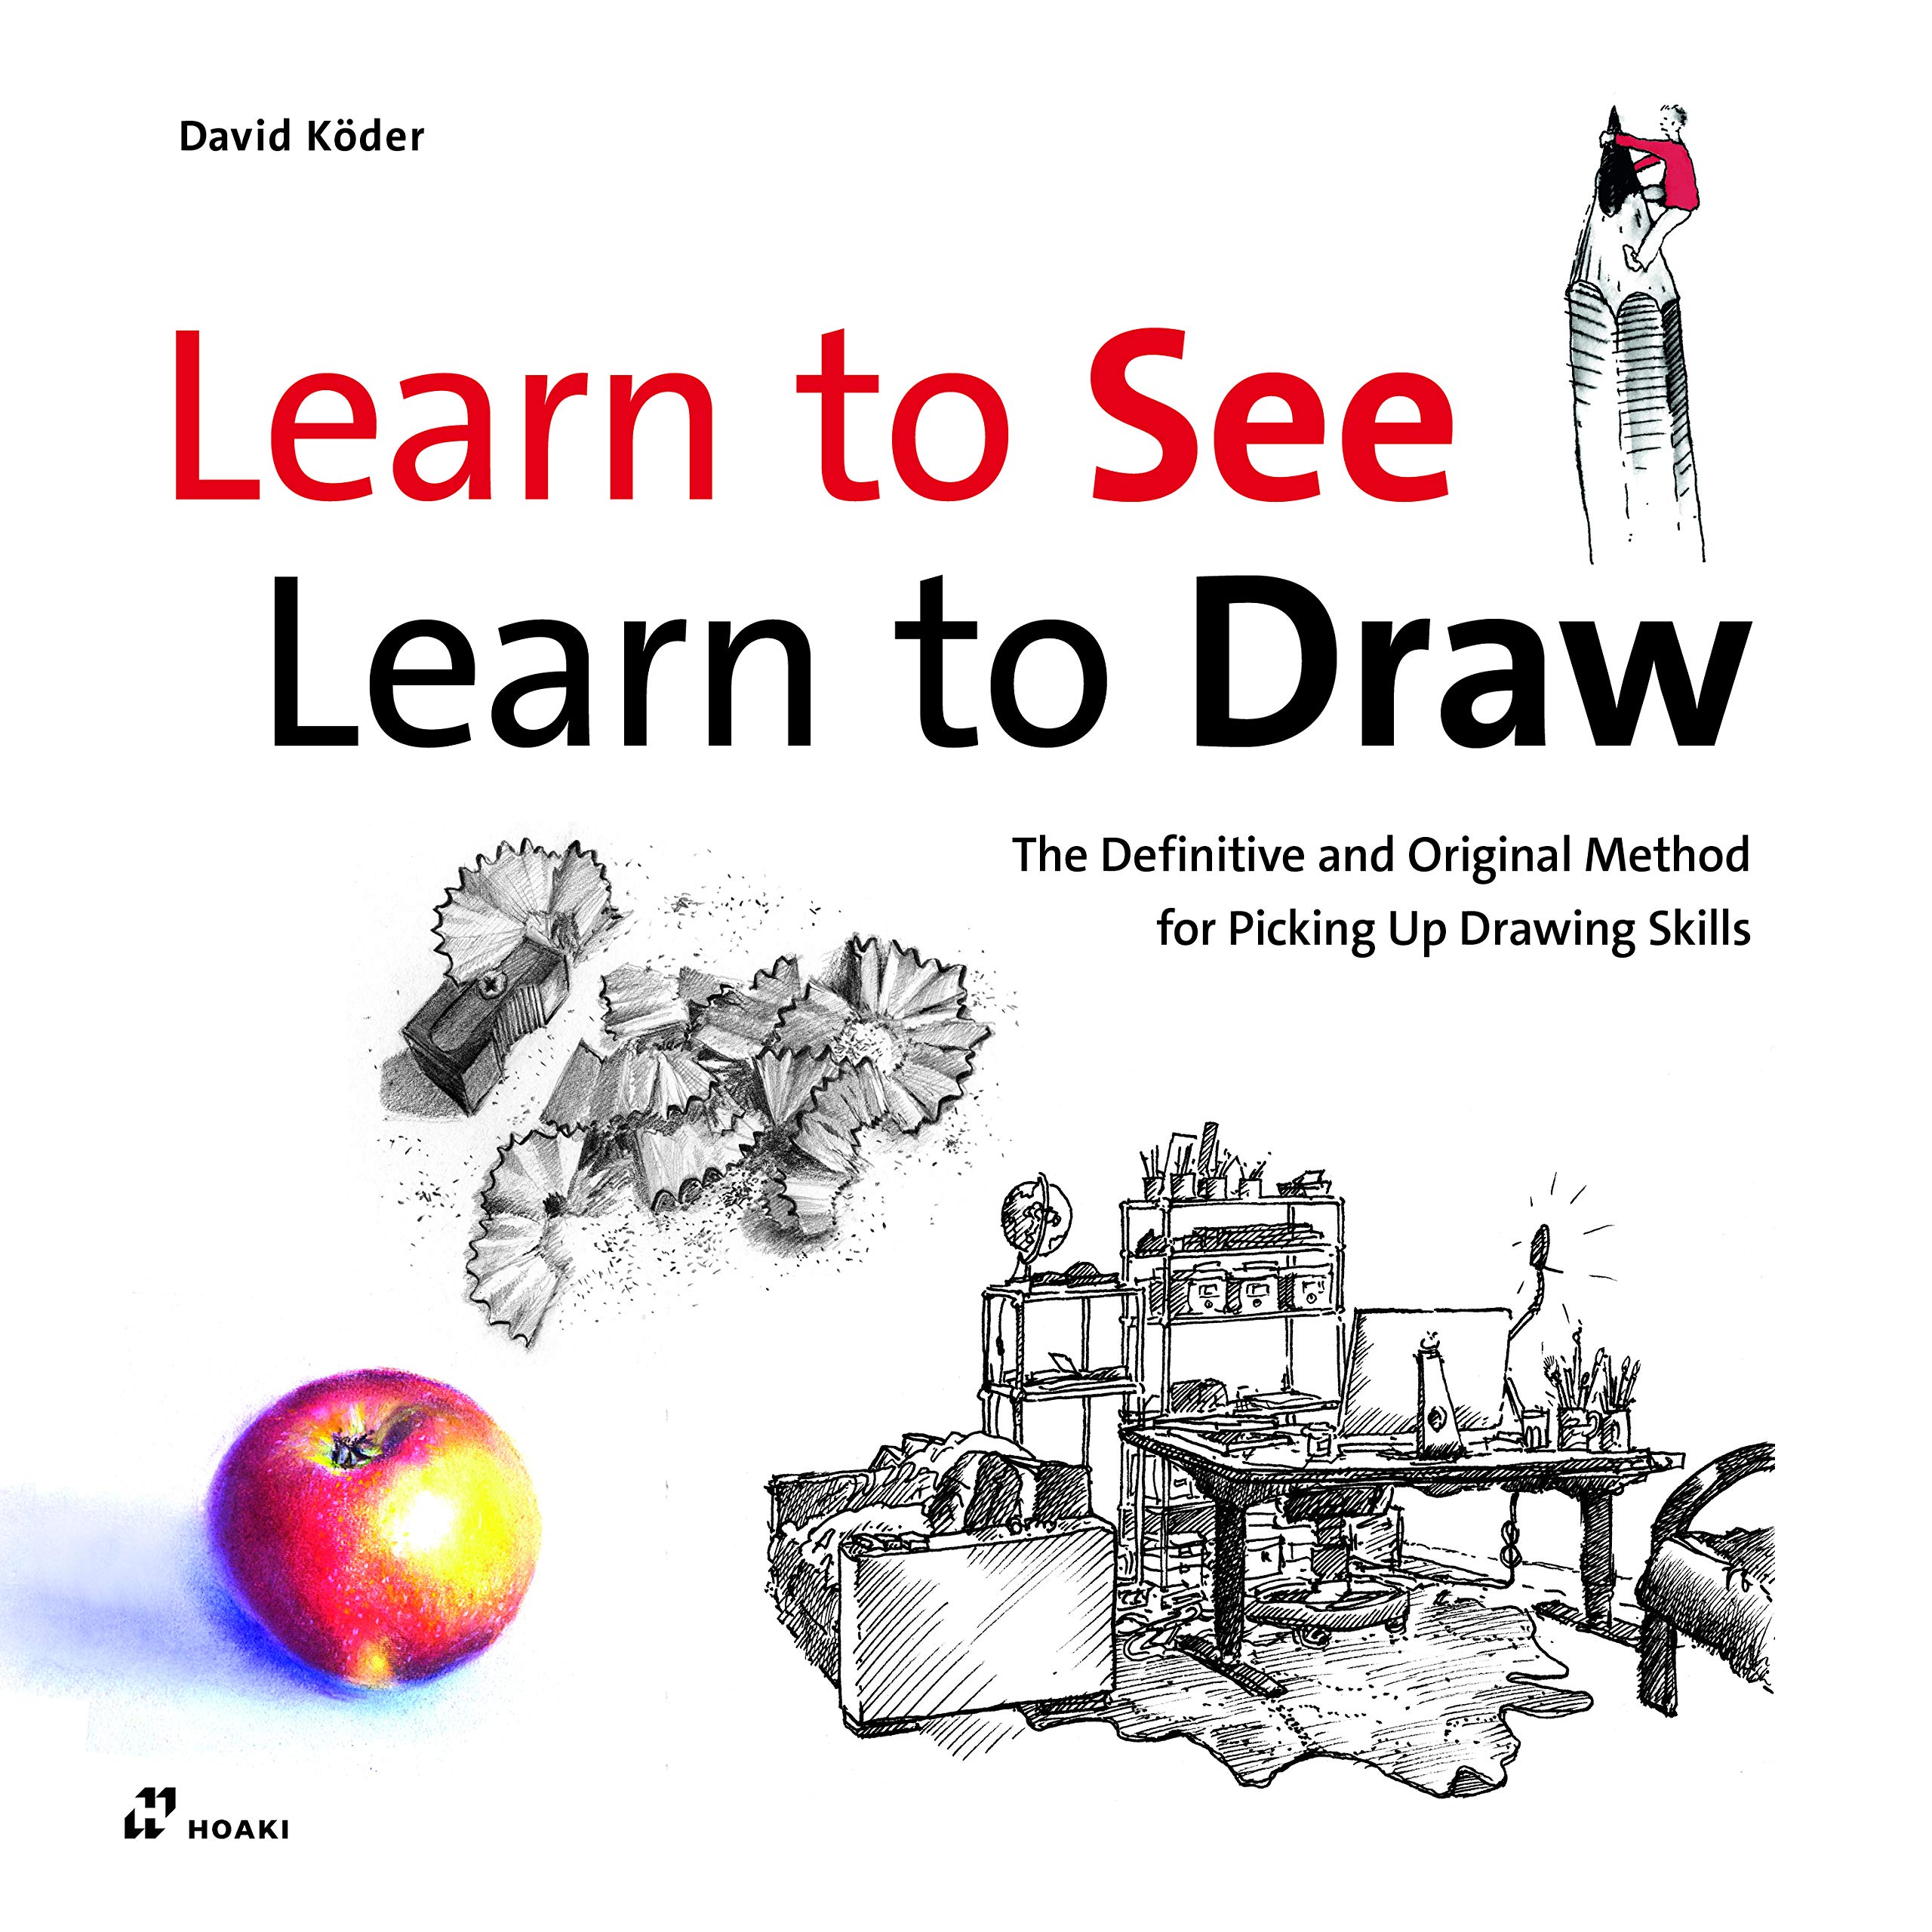 Learn to See, Learn to Draw